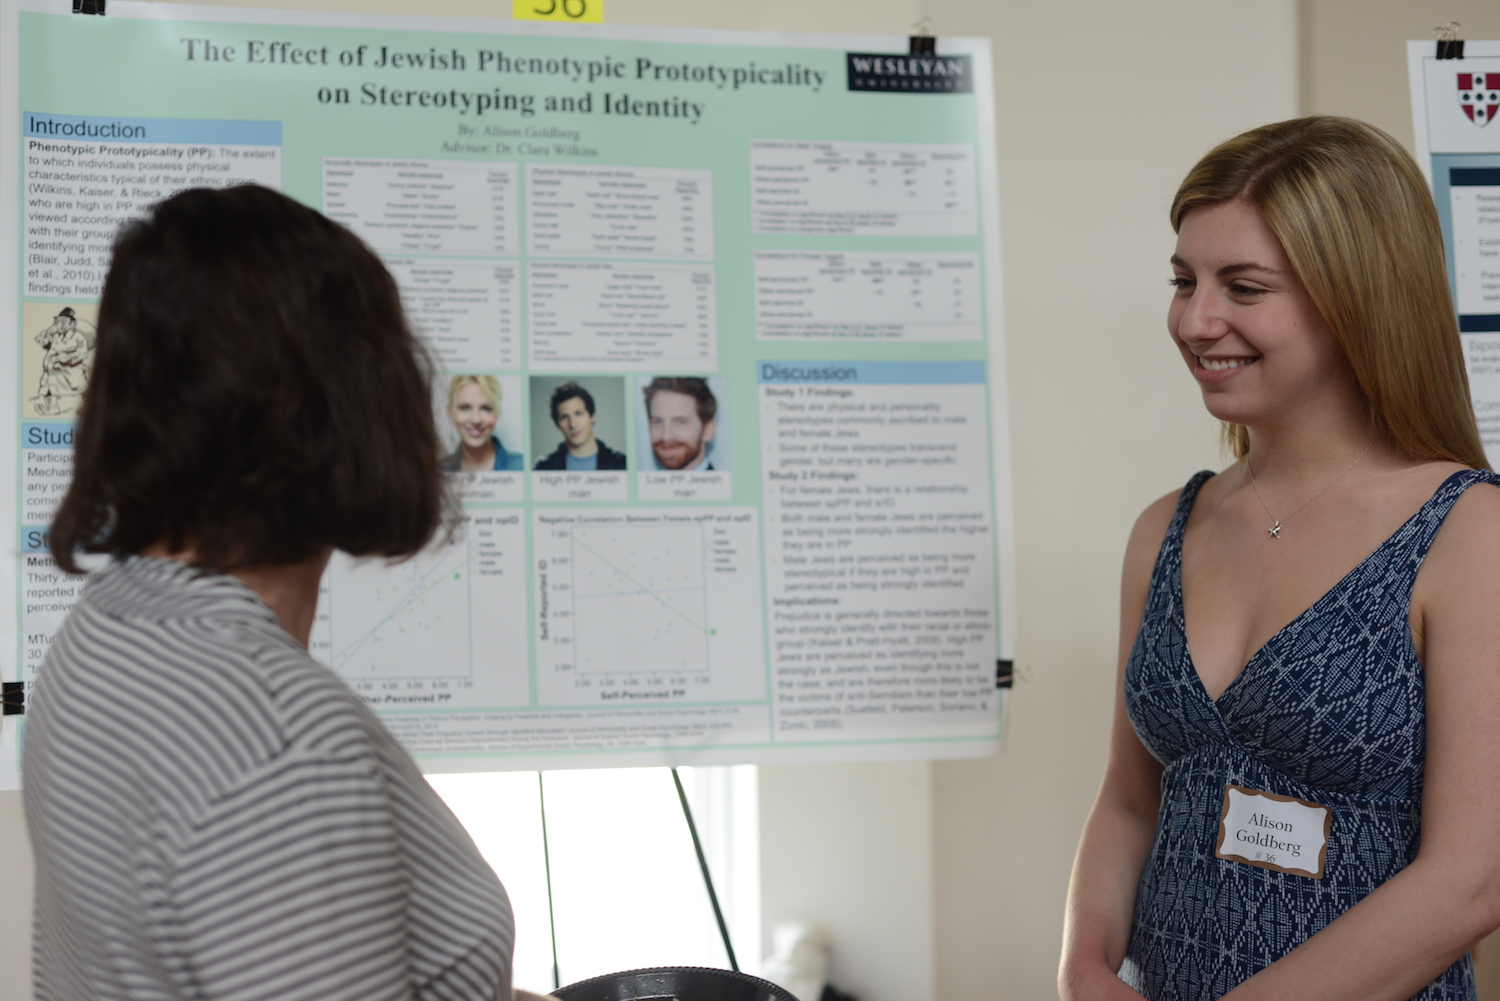 Alison Goldberg '15 with her project, "The Effect of Jewish Phenotypic Prototypicality on Stereotyping and Identity."